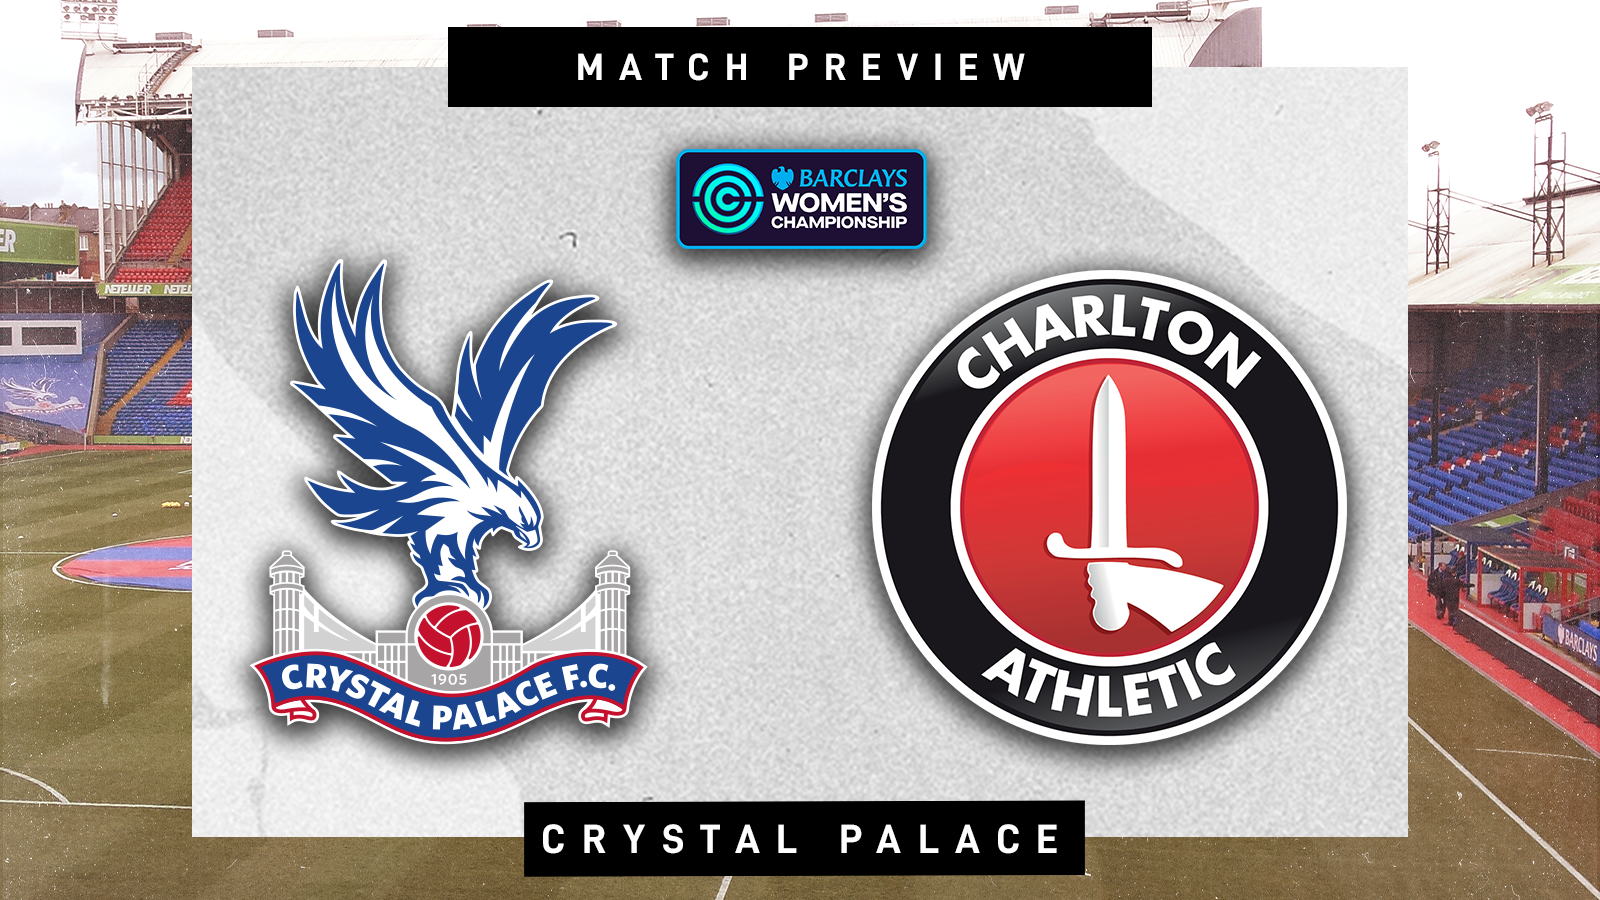 MATCH PREVIEW | Crystal Palace v Charlton 